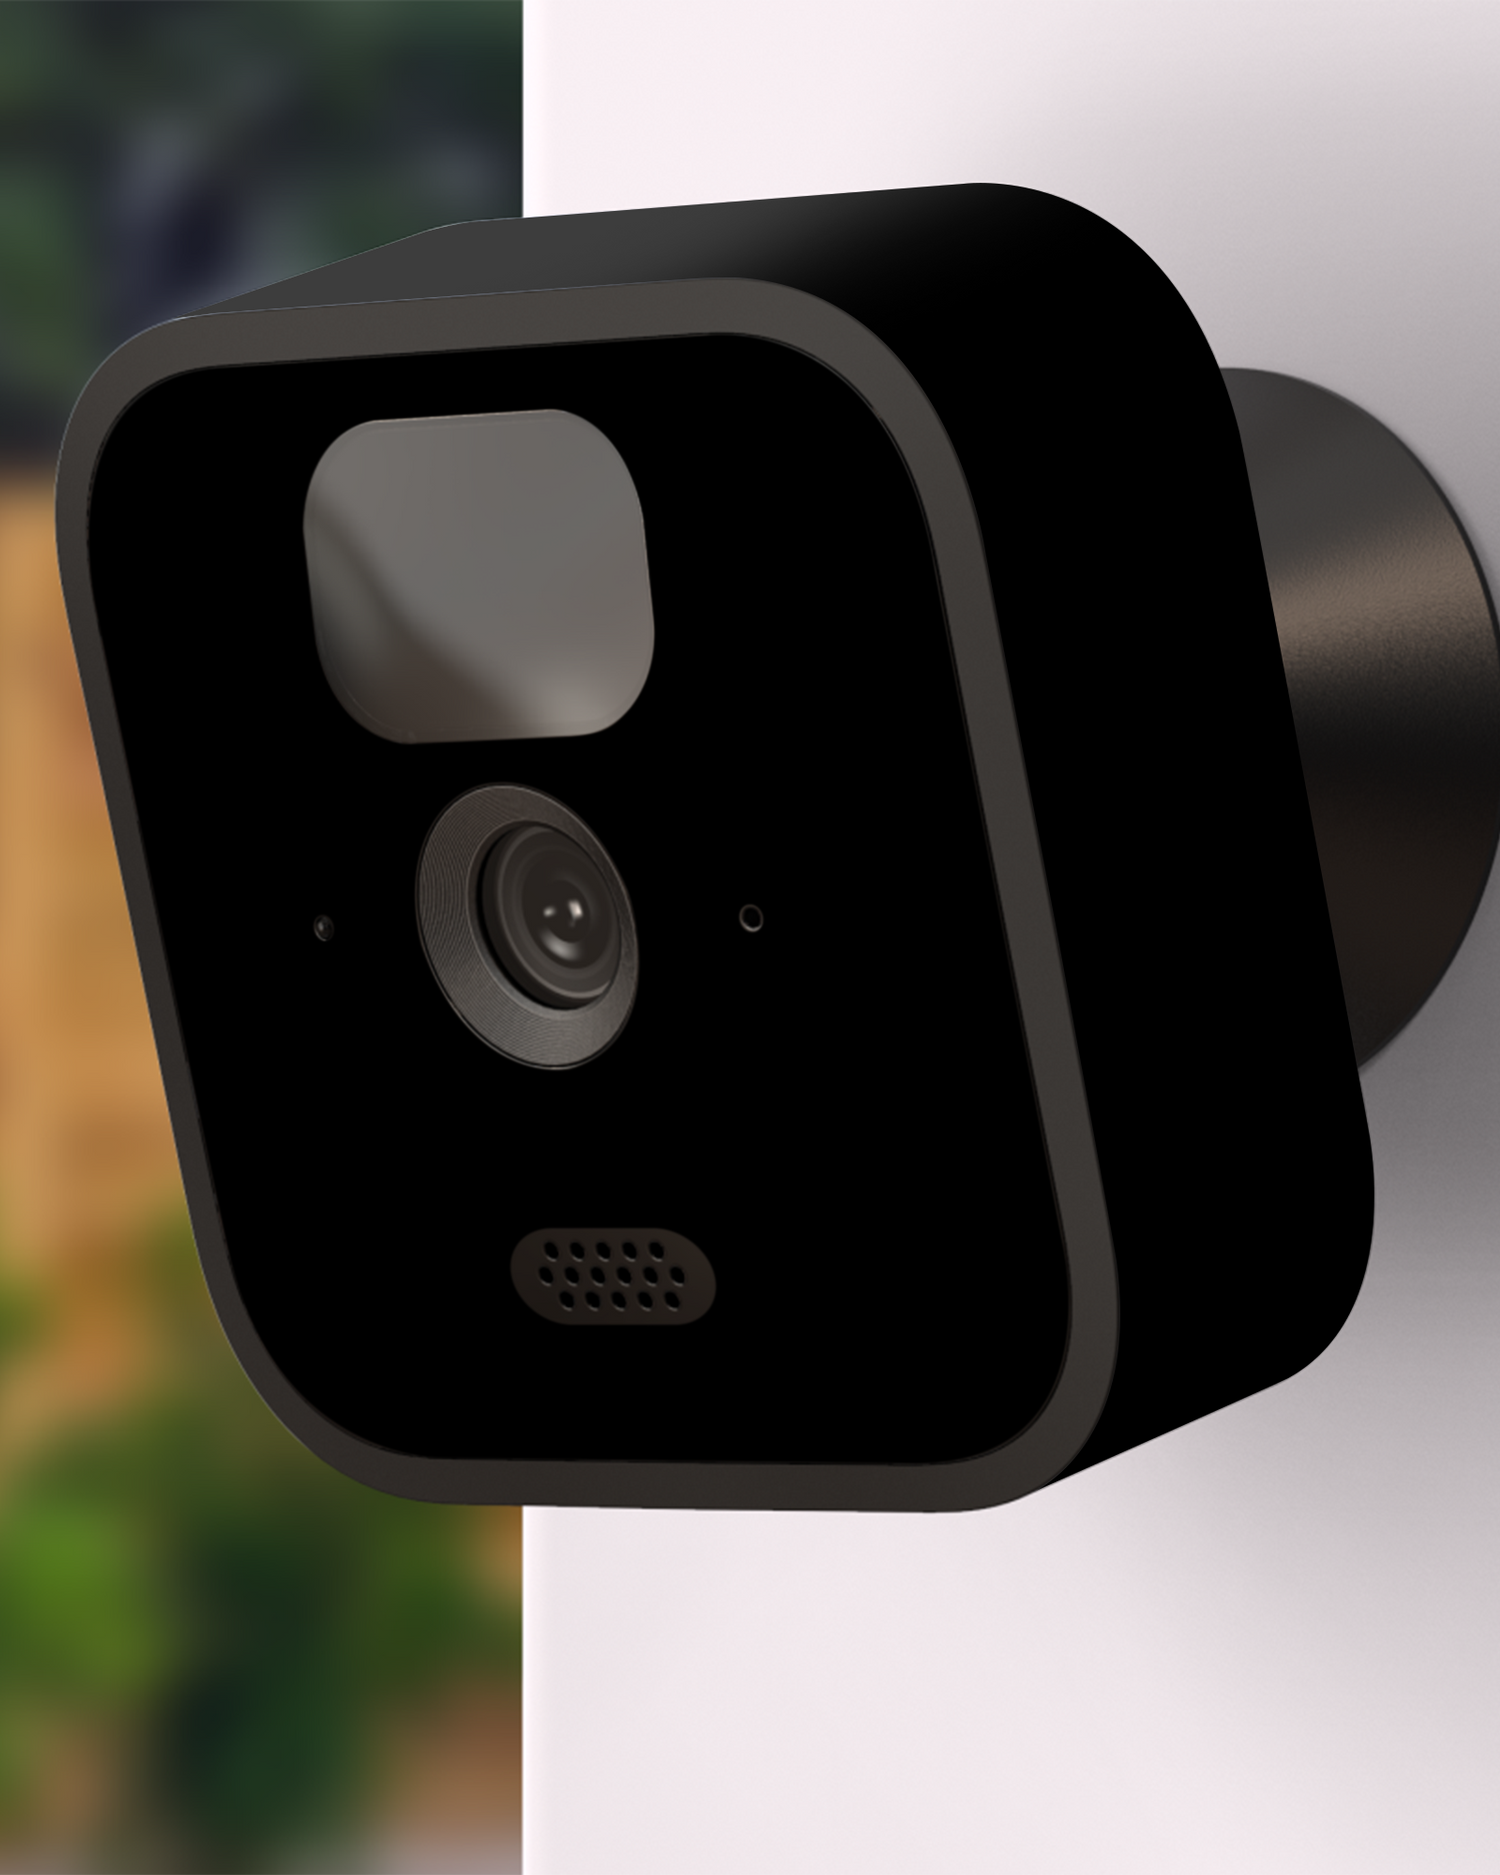 ISG Black Camera Skin Blink Outdoor (2020) attached to exterior wall